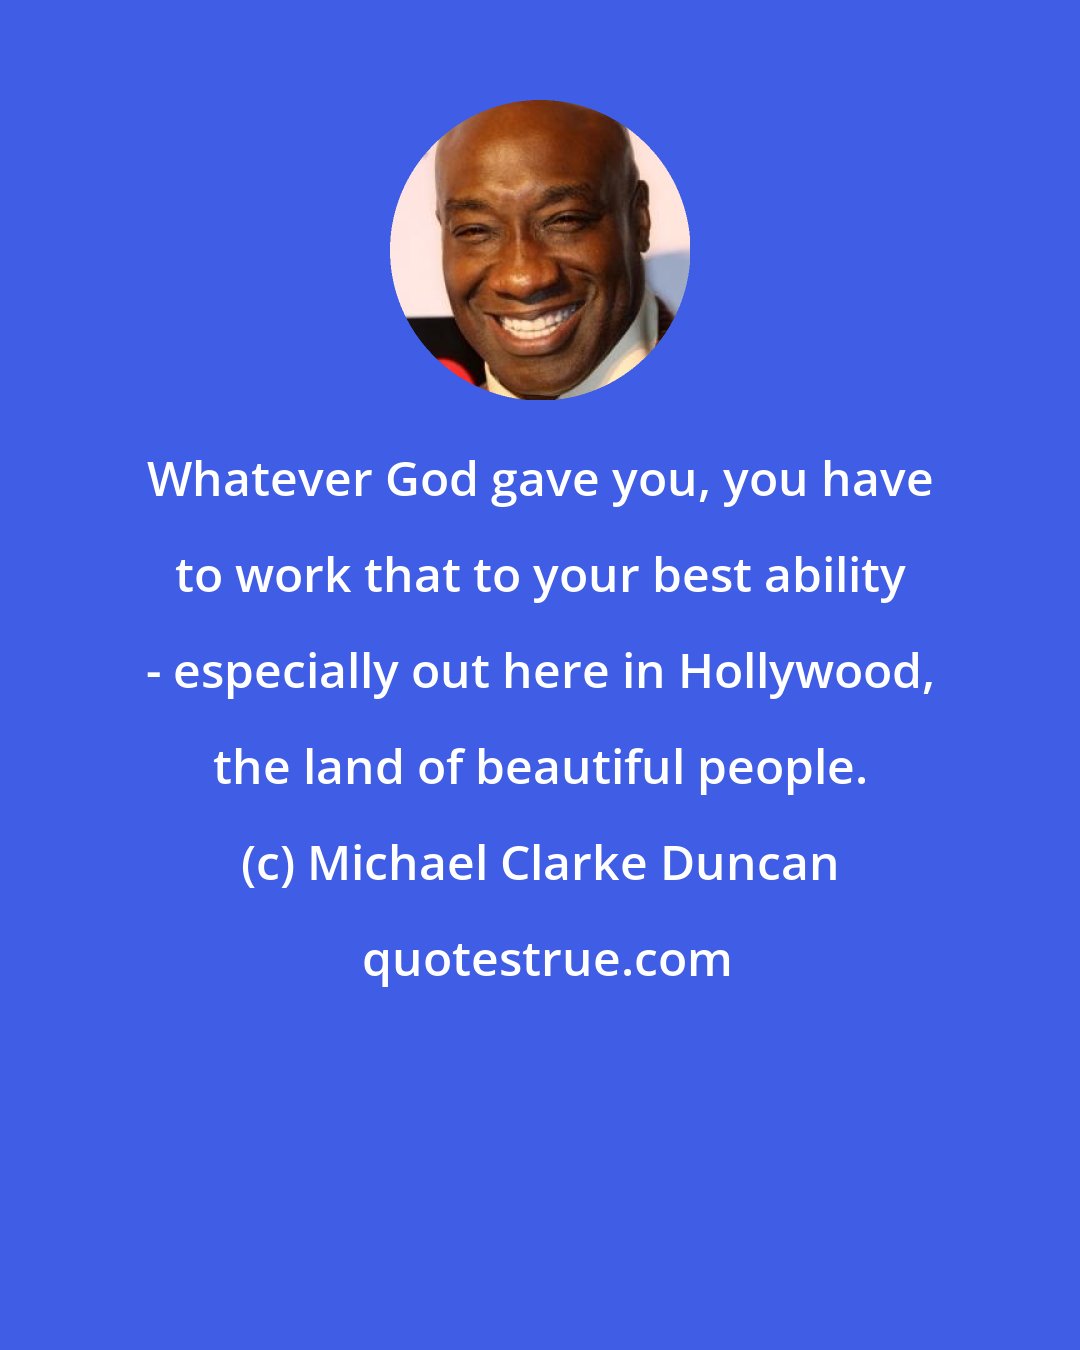 Michael Clarke Duncan: Whatever God gave you, you have to work that to your best ability - especially out here in Hollywood, the land of beautiful people.